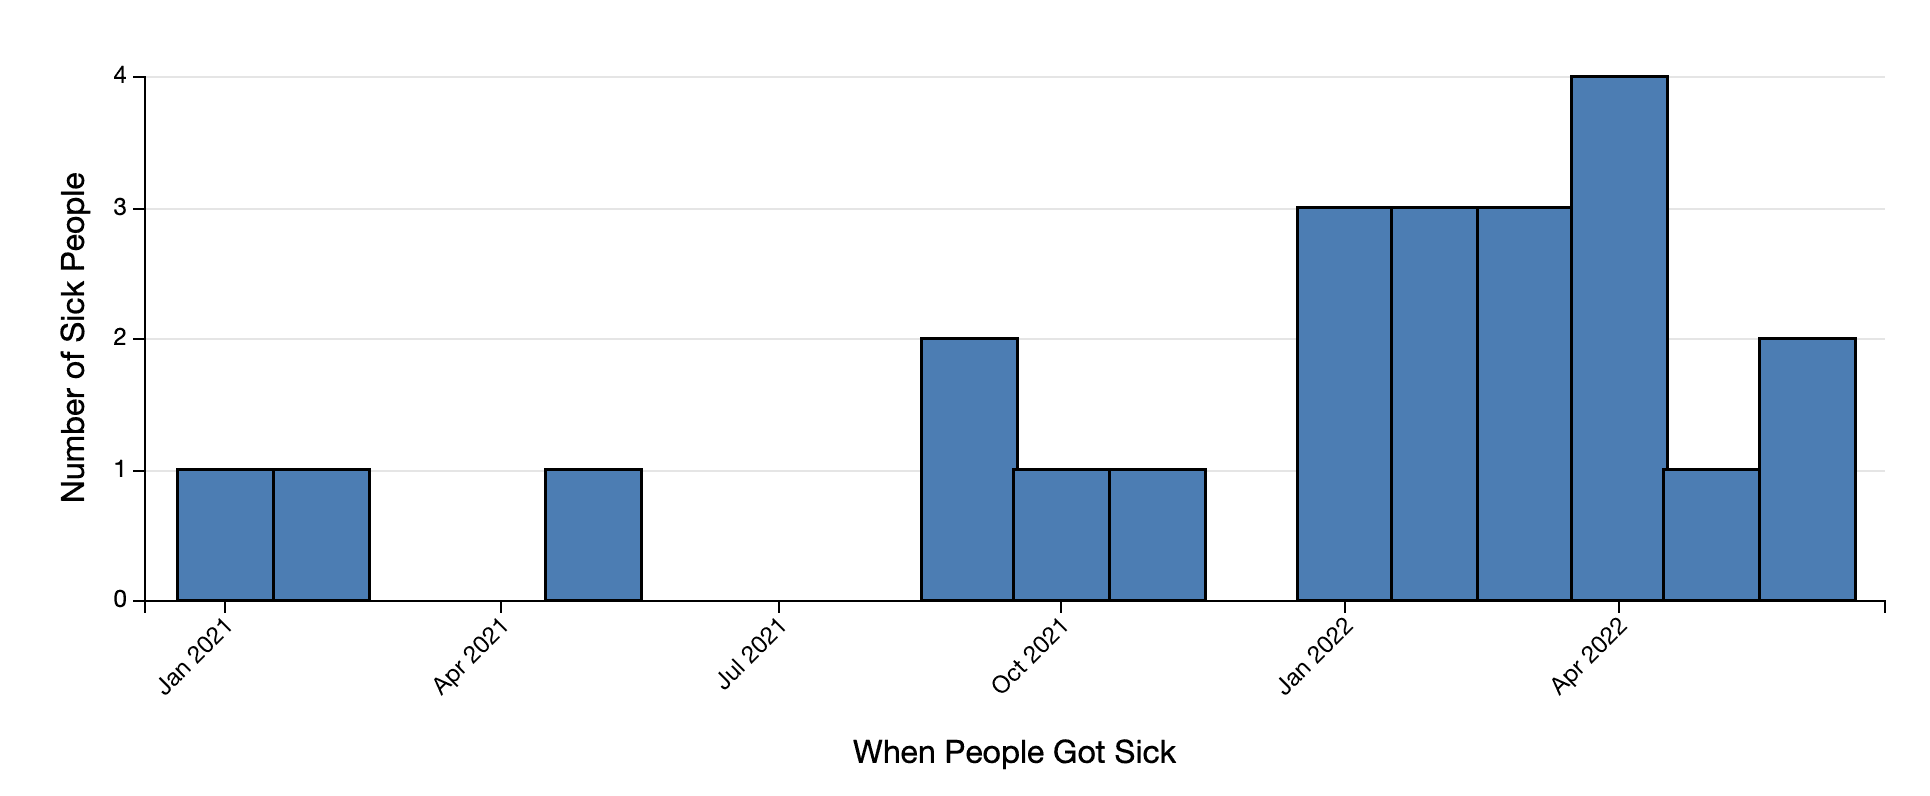 Number of illnesses each month